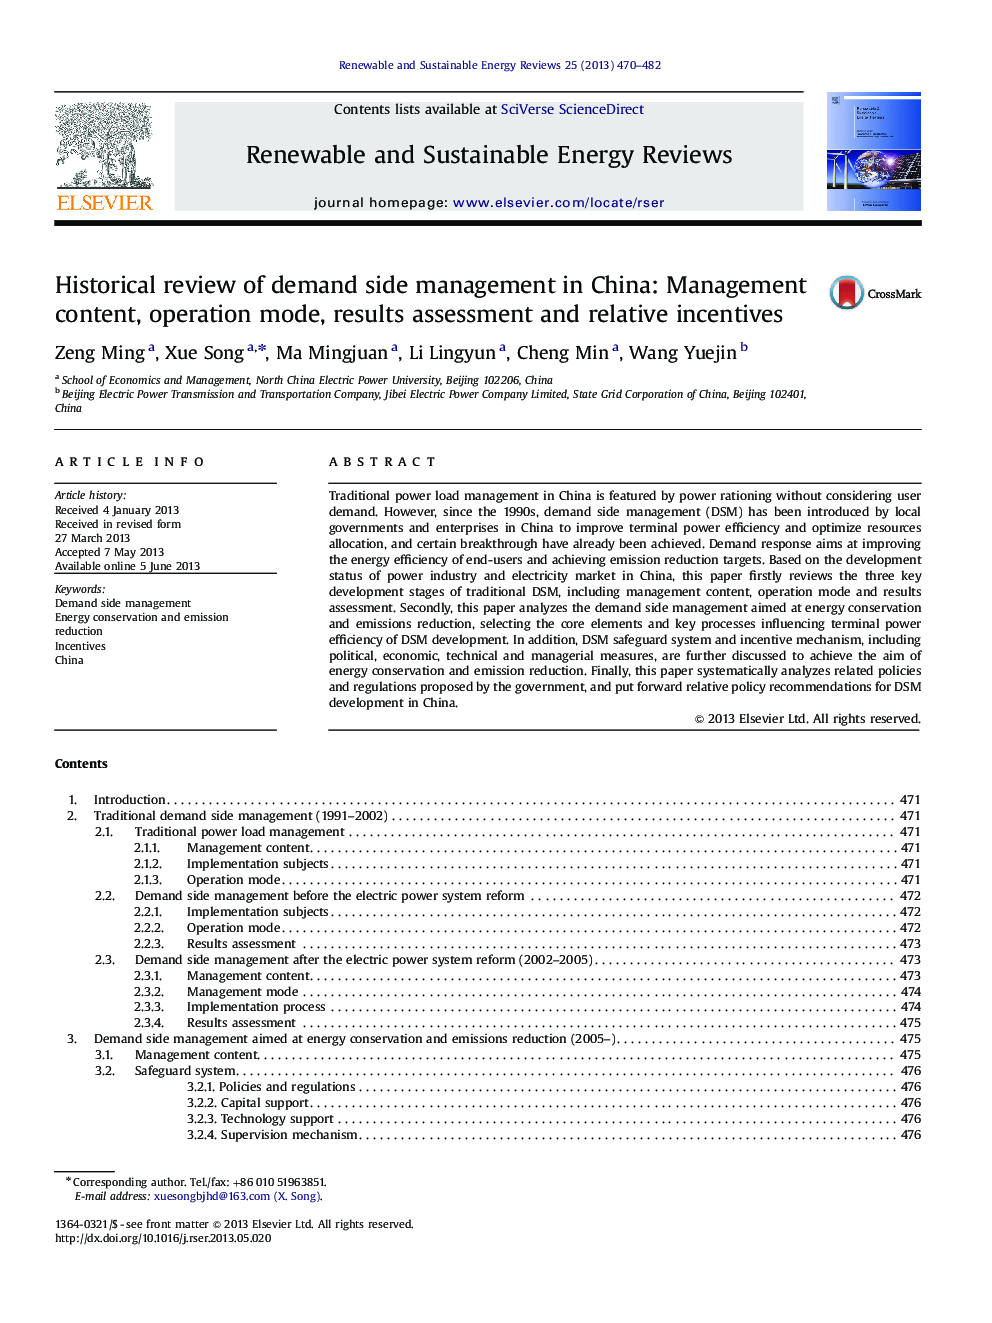 Historical review of demand side management in China: Management content, operation mode, results assessment and relative incentives